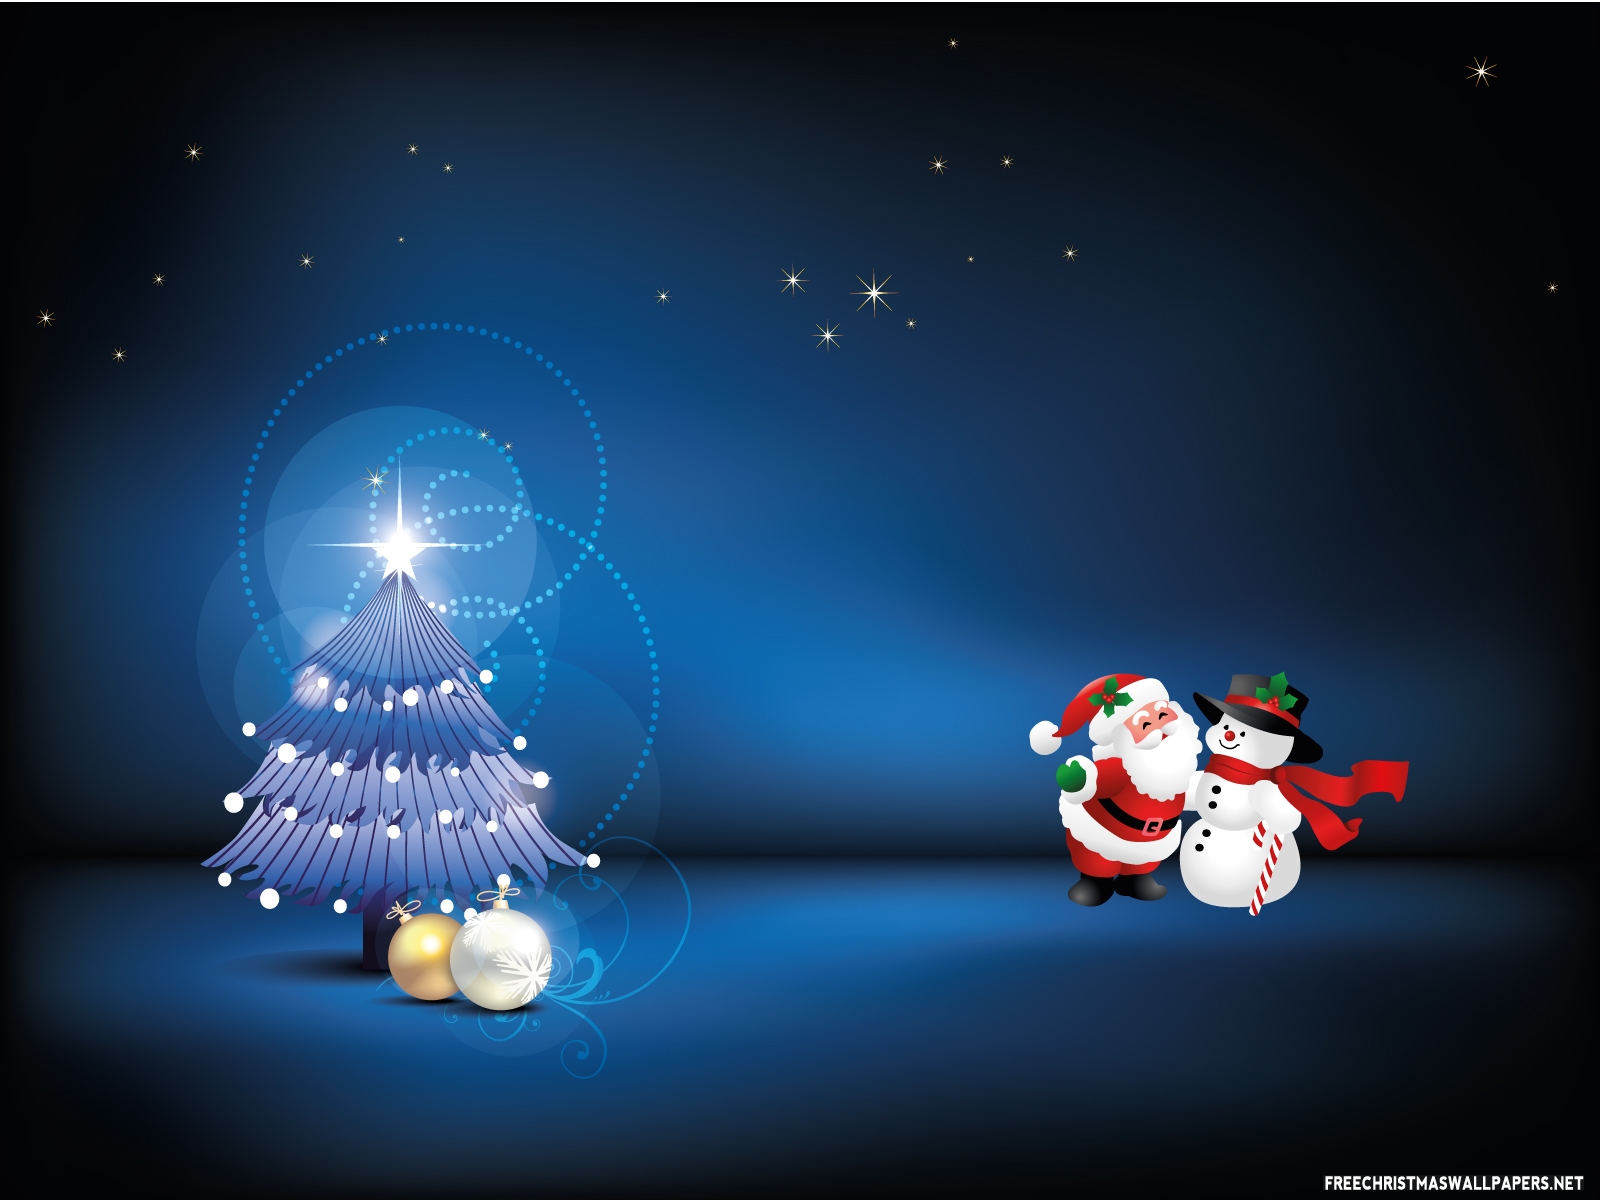 Merry Christmas - Merry Christmas And Happy New Year In Advance - HD Wallpaper 